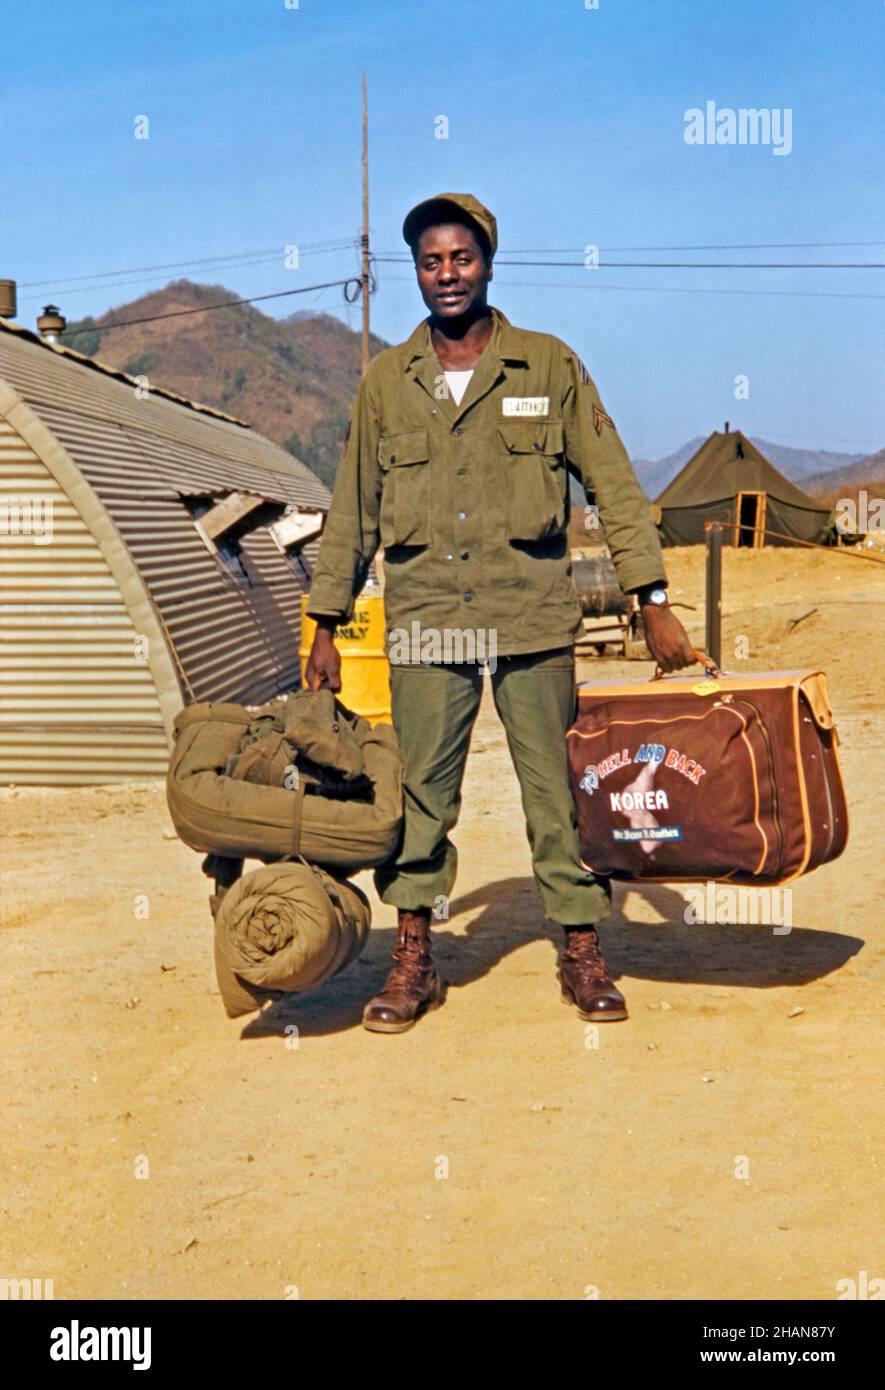 An American soldier ready to return home from his tour of duty in the Korean War in 1953. The black serviceman carries a brand-new kitbag with the slogan ‘To Hell and Back – Korea’. Definitely not military issue, this must have been bought locally as a souvenir of the time spent on active service overseas. This amateur Kodak colour transparency was taken by a fellow serviceman – a vintage 1950s photograph. Stock Photo